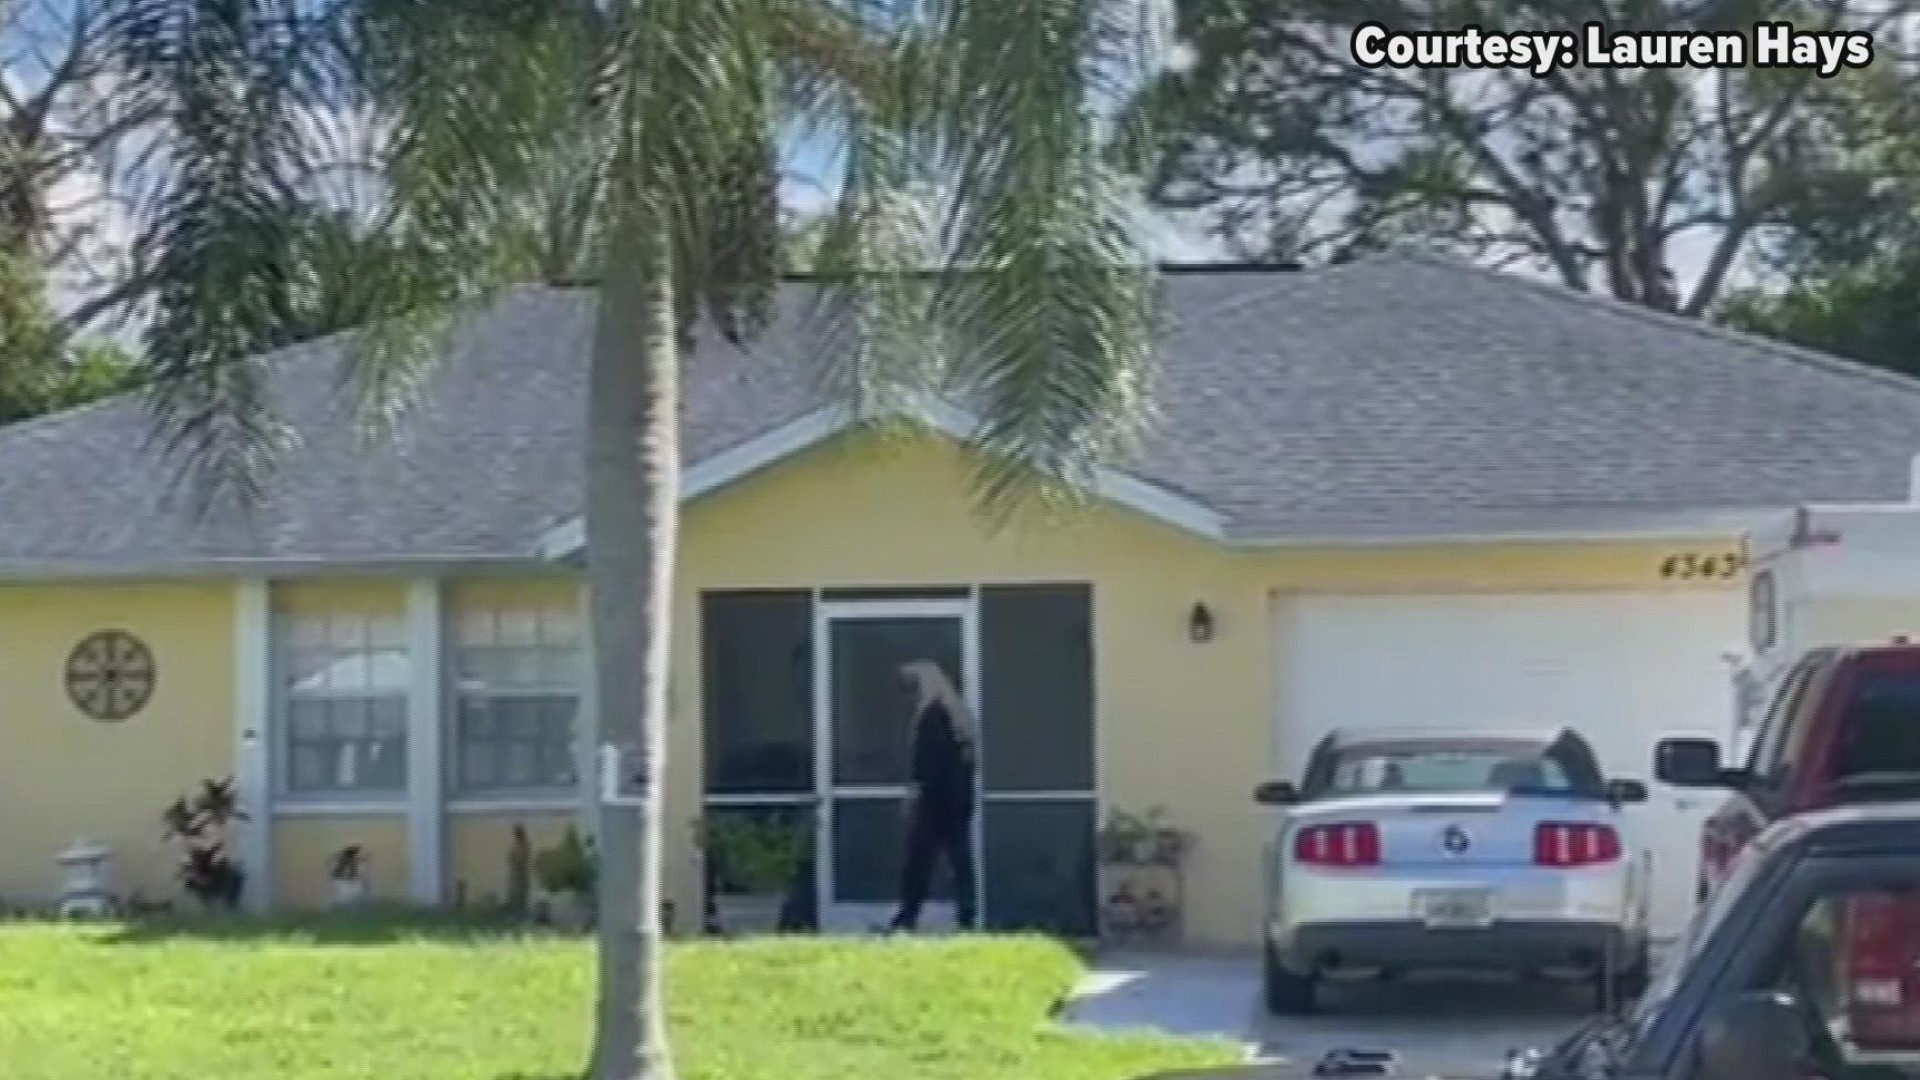 As the nation eyes the Gabby Petito case, Dog the Bounty Hunter visits the Laundrie family home Sept. 24.